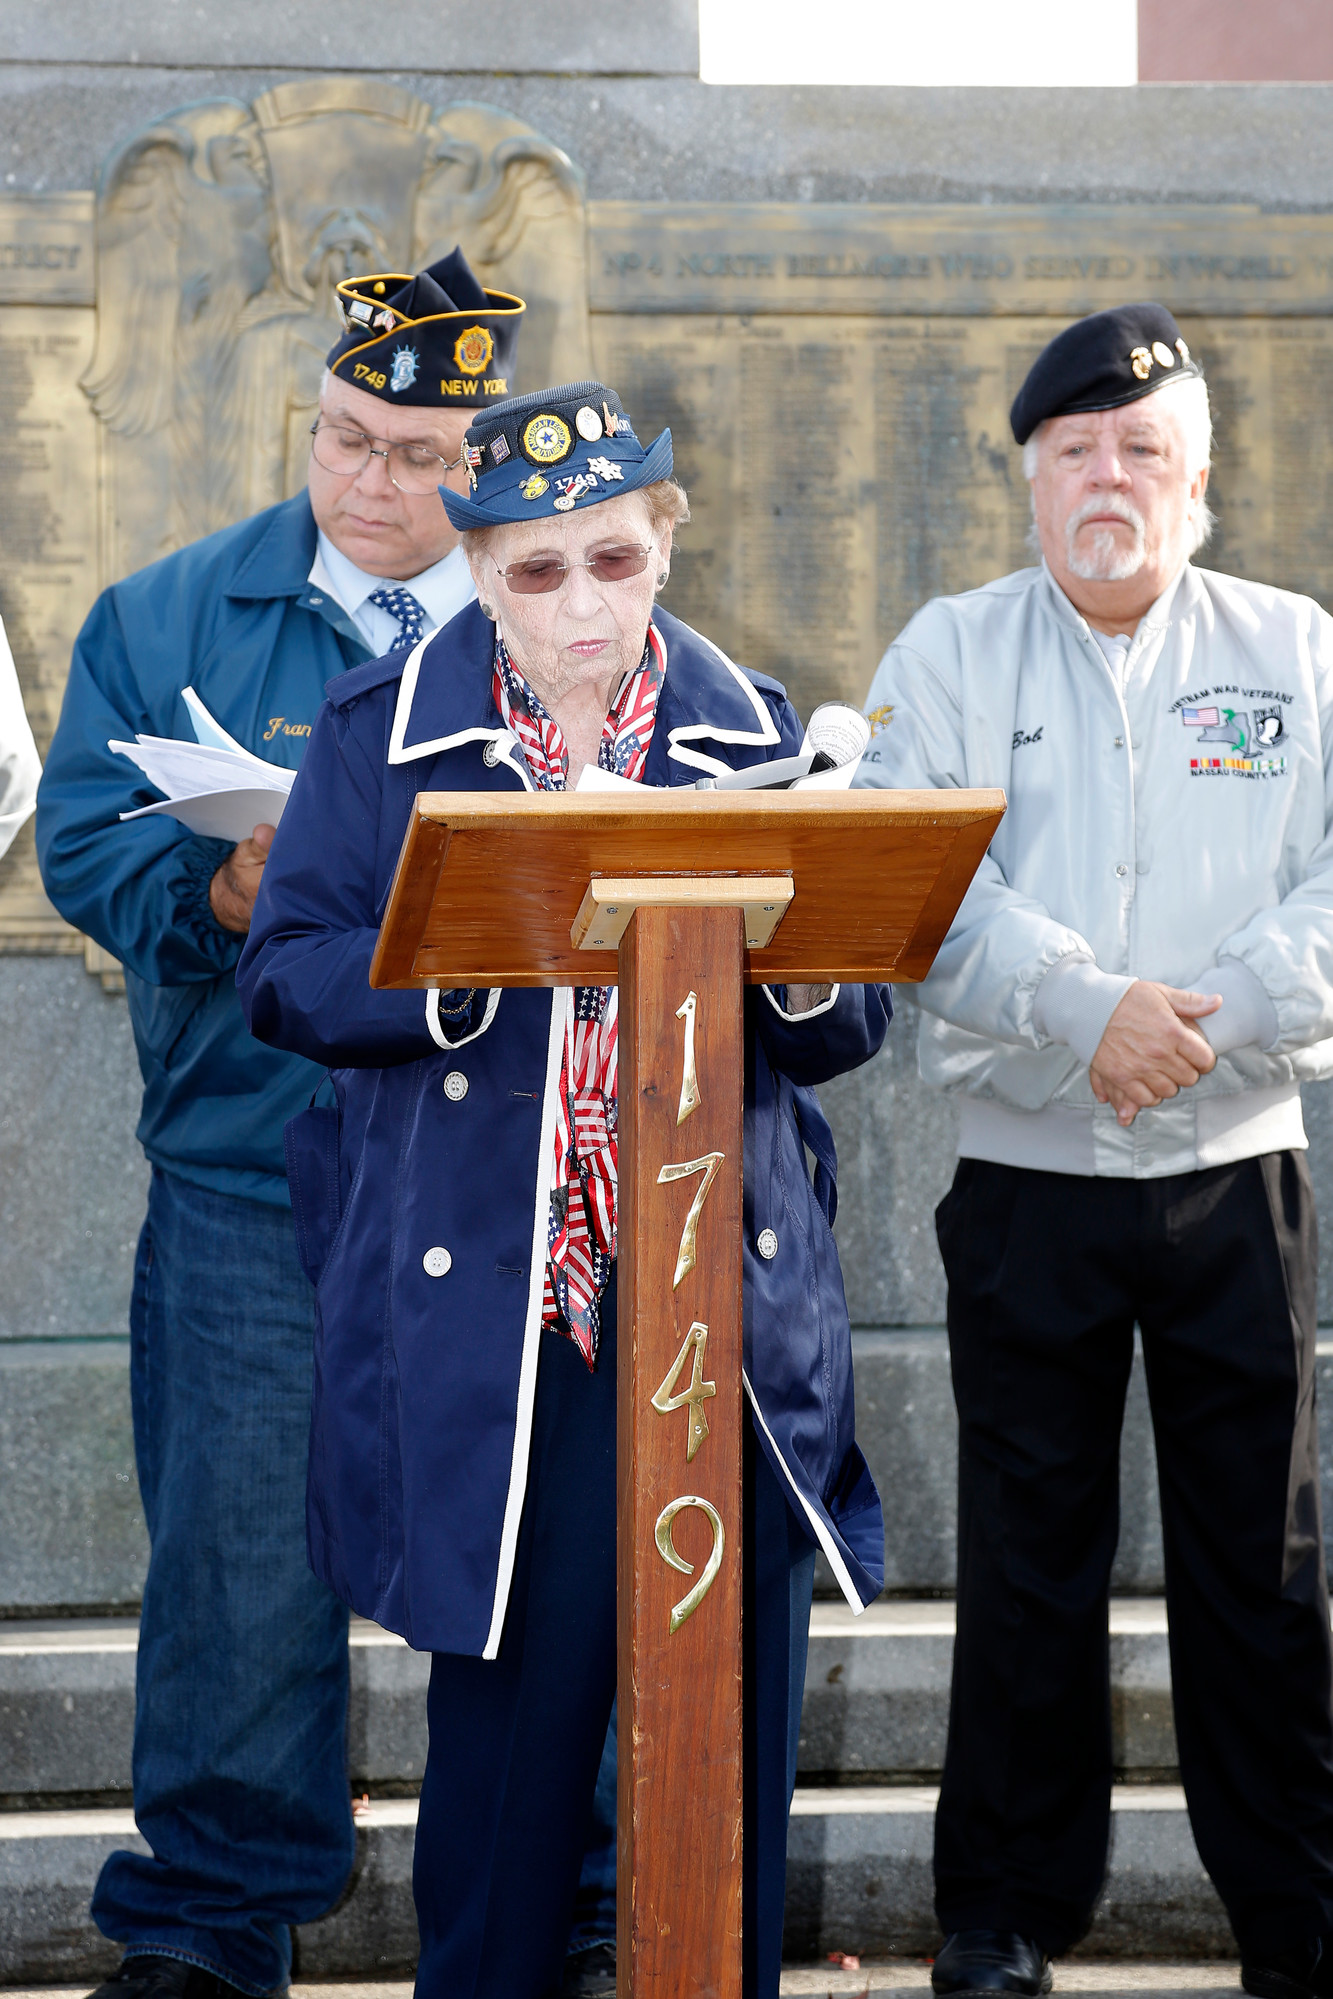 Greta Hicks, a member of the Ladies Auxiliary of North Bellmore American Legion Post 1749, offered her thoughts on Veterans Day.